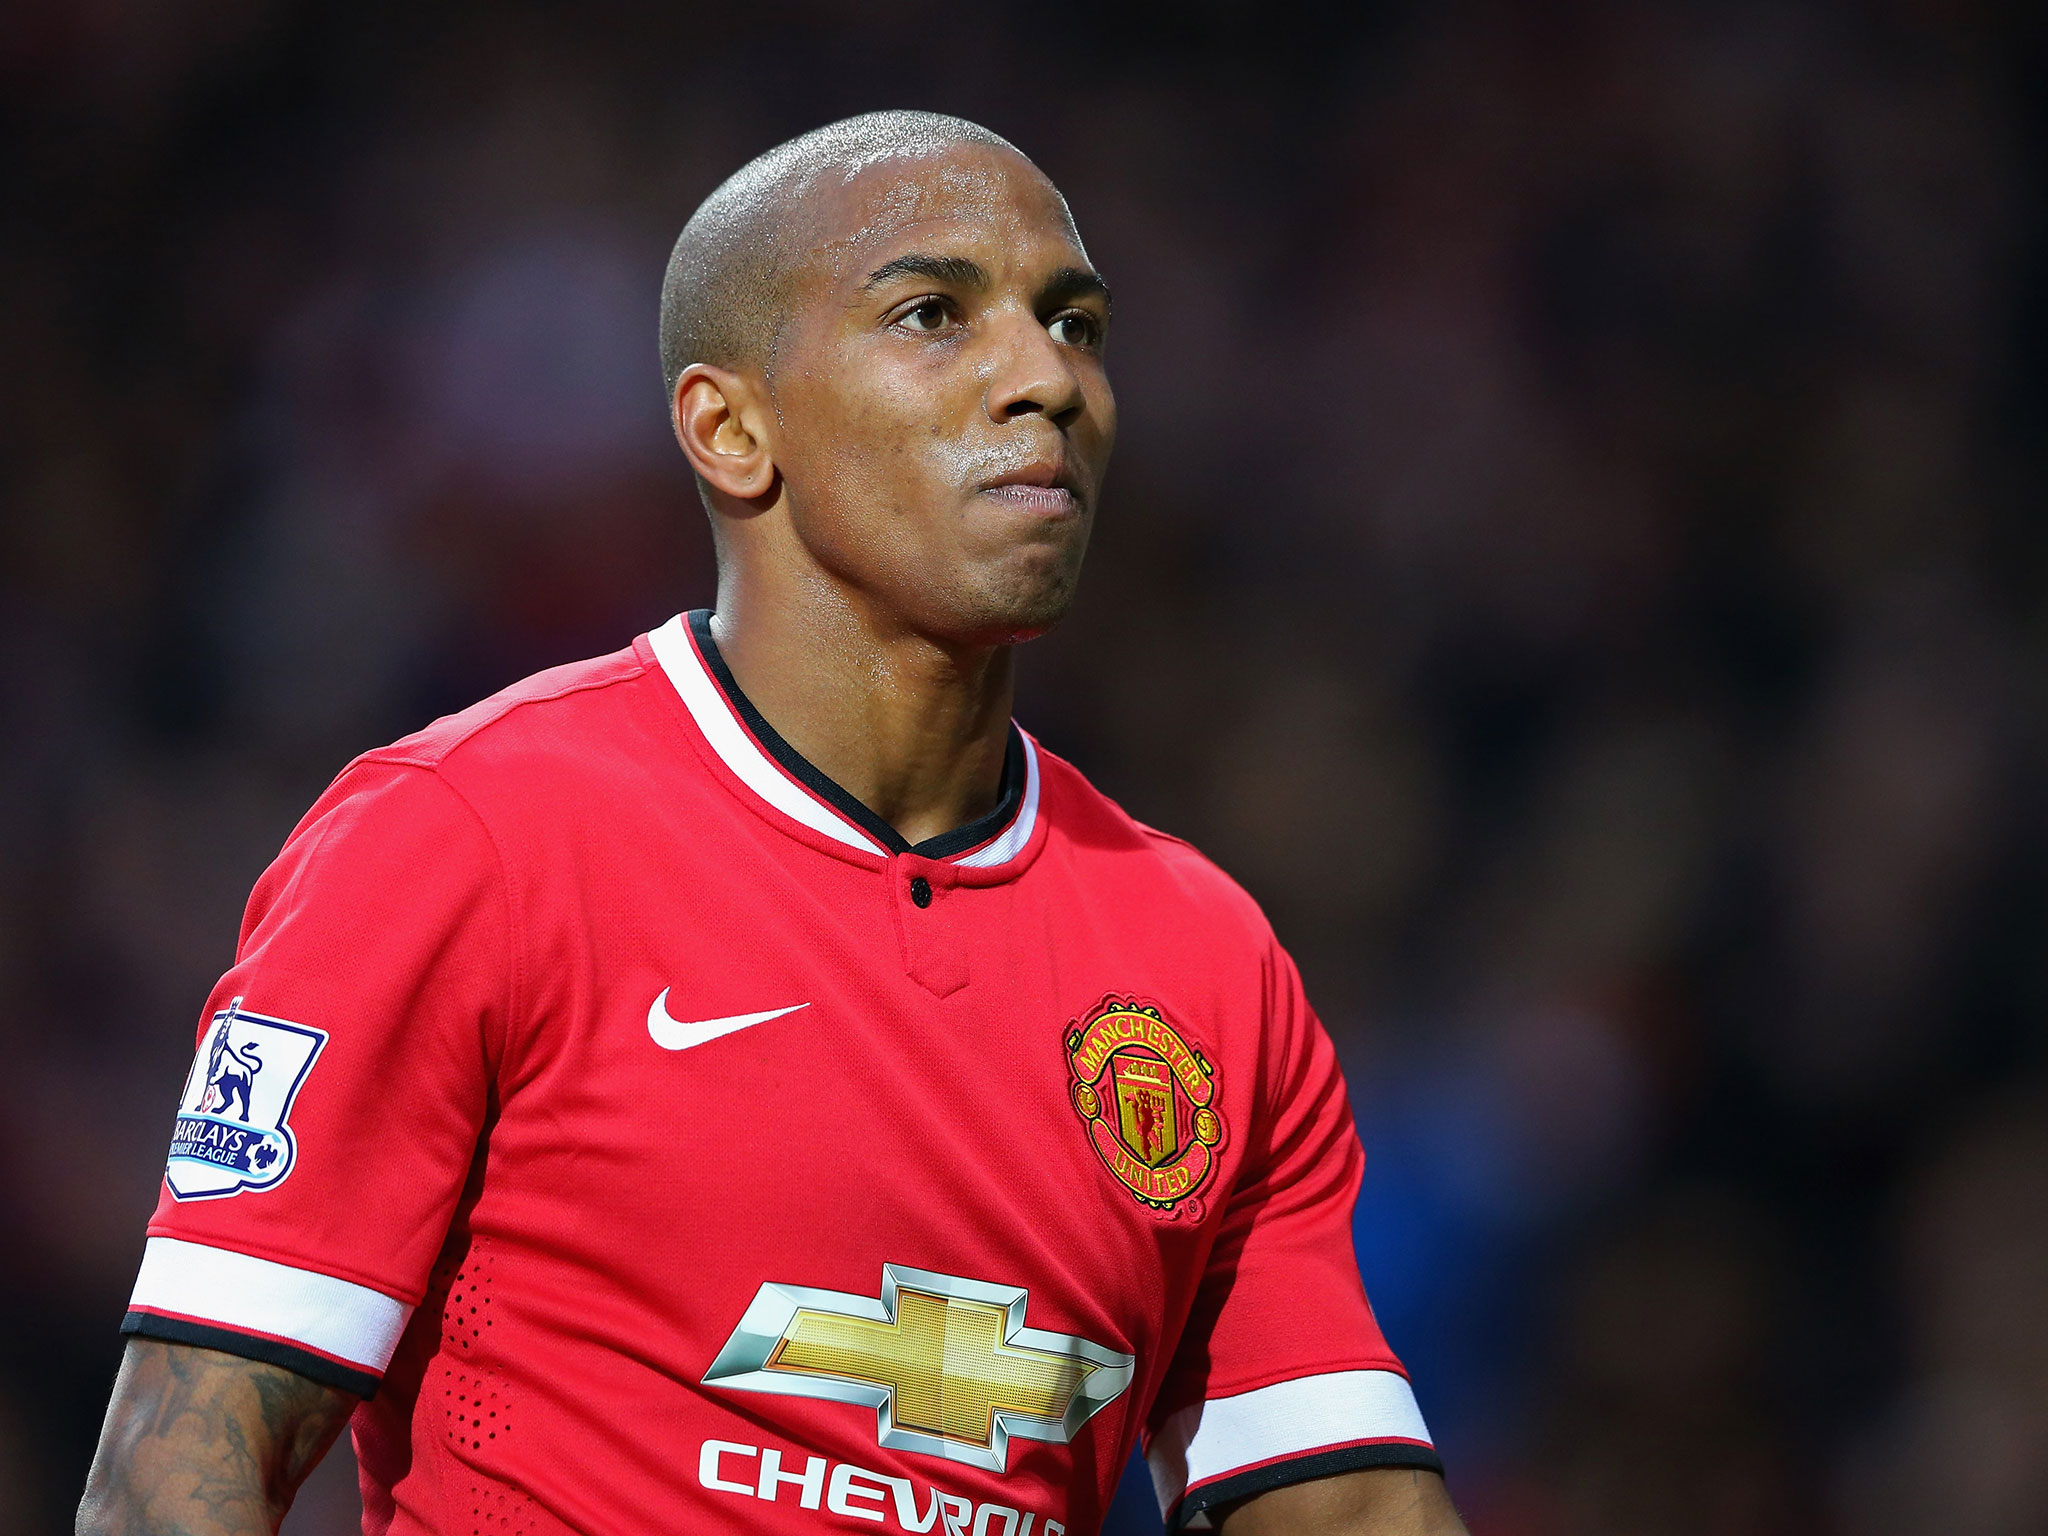 Ashley Young Says He Has Deep Passion To Play For United